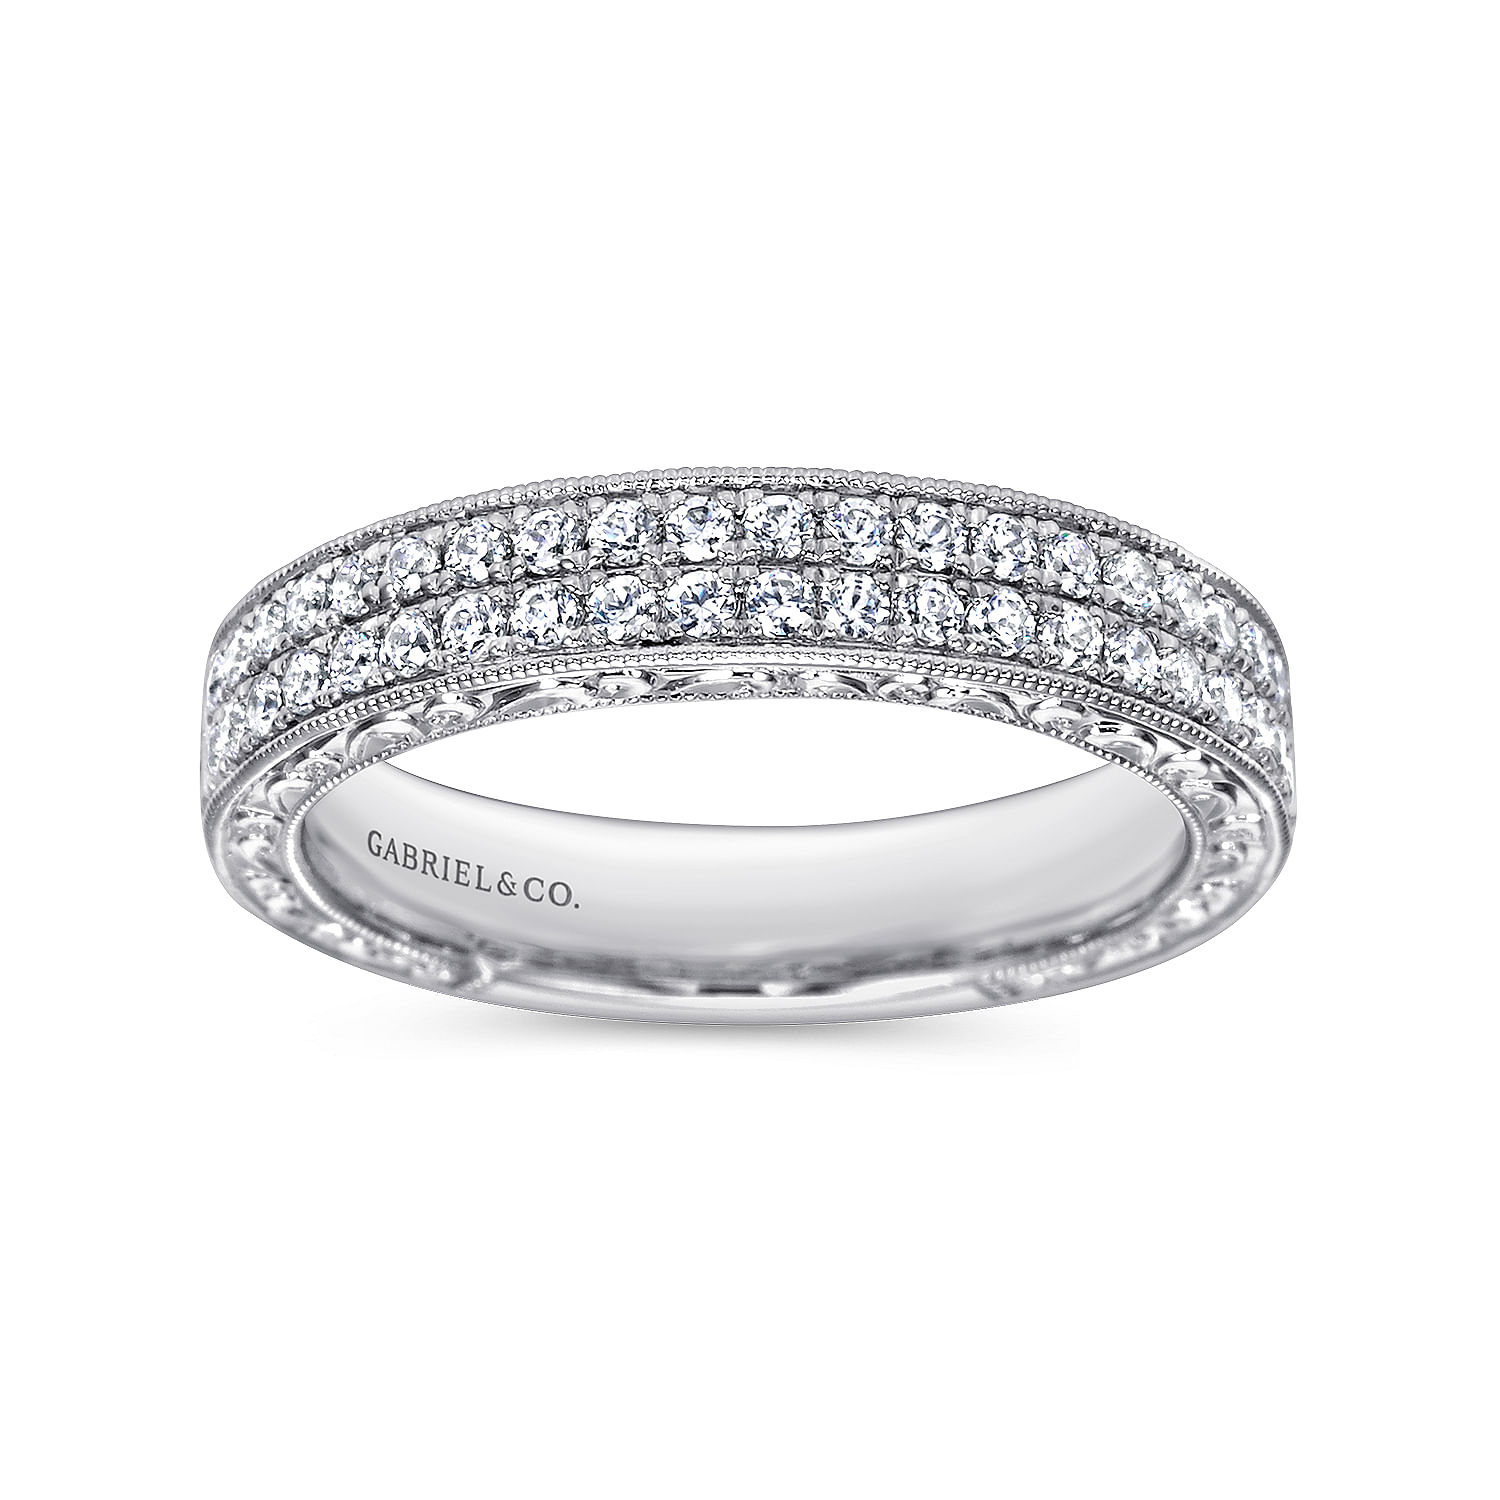 Vintage Inspired 14K White Gold Diamond Anniversary Band with Hand Engraving